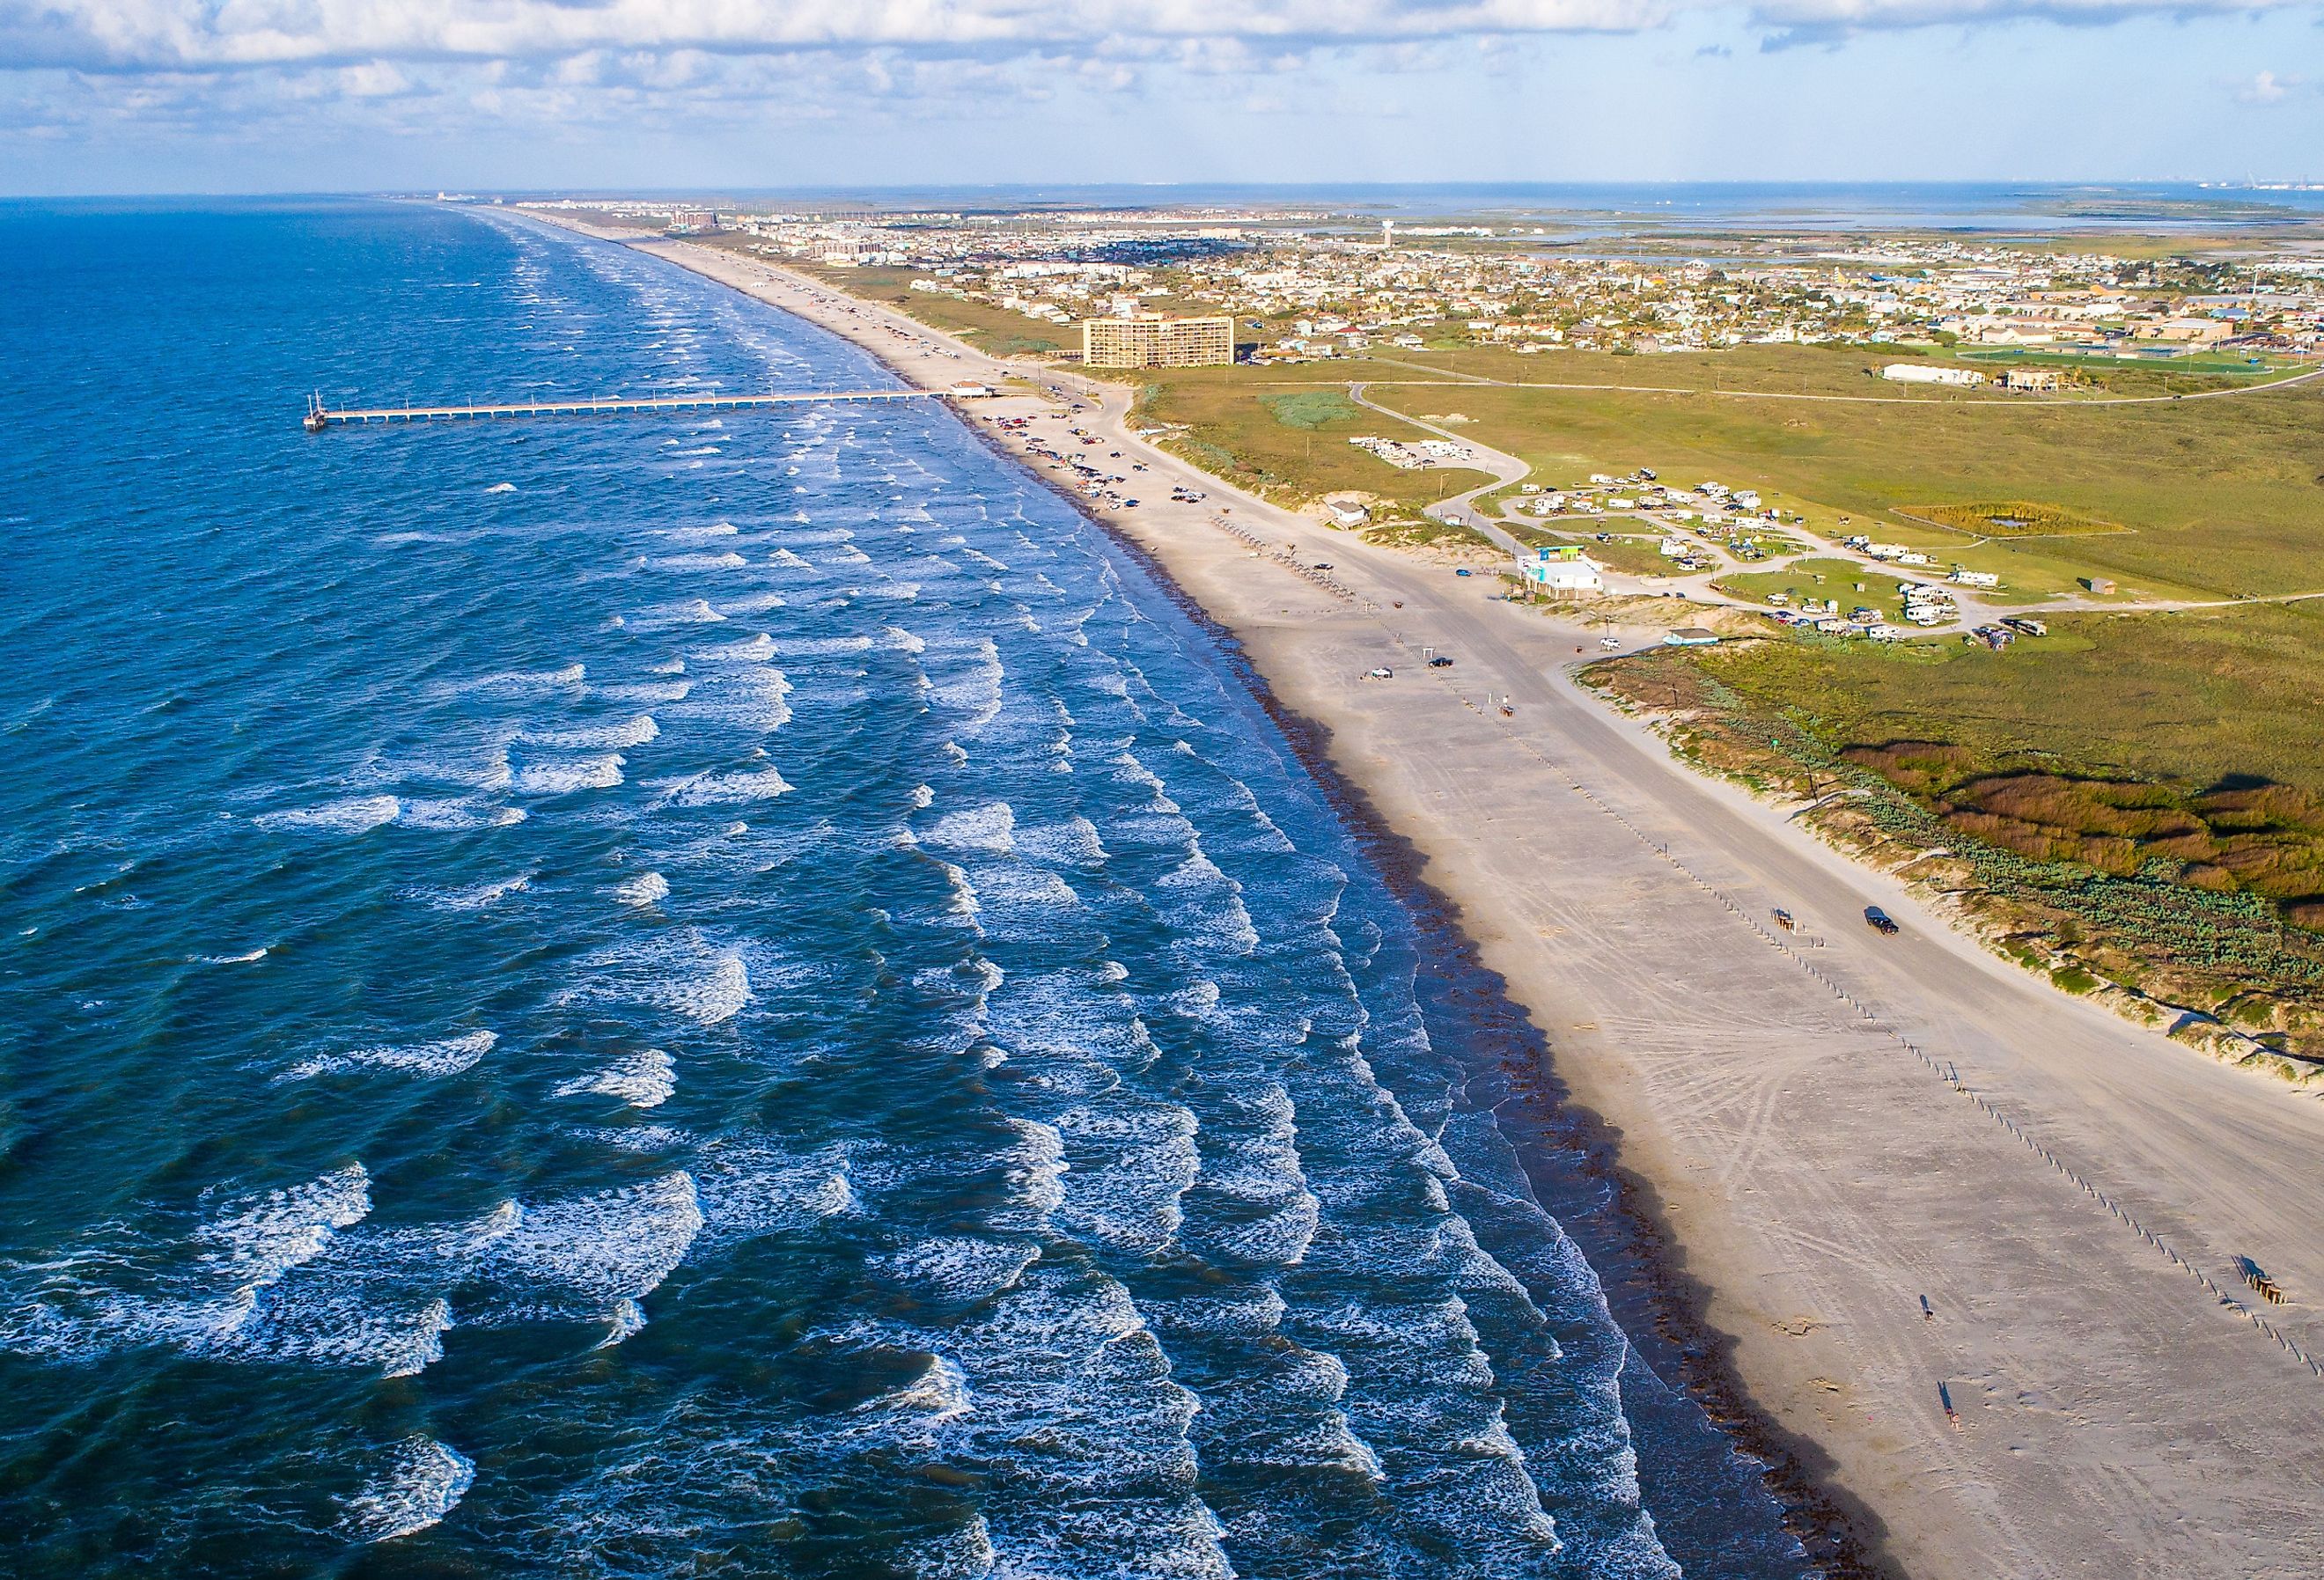 High above the Padre Island shoreline in Port Aransas, Texas waves crashing for miles with pier in the background deep blue water extended out into the Gulf of Mexico. Image credit Roschetzky Photography via Shutterstock.